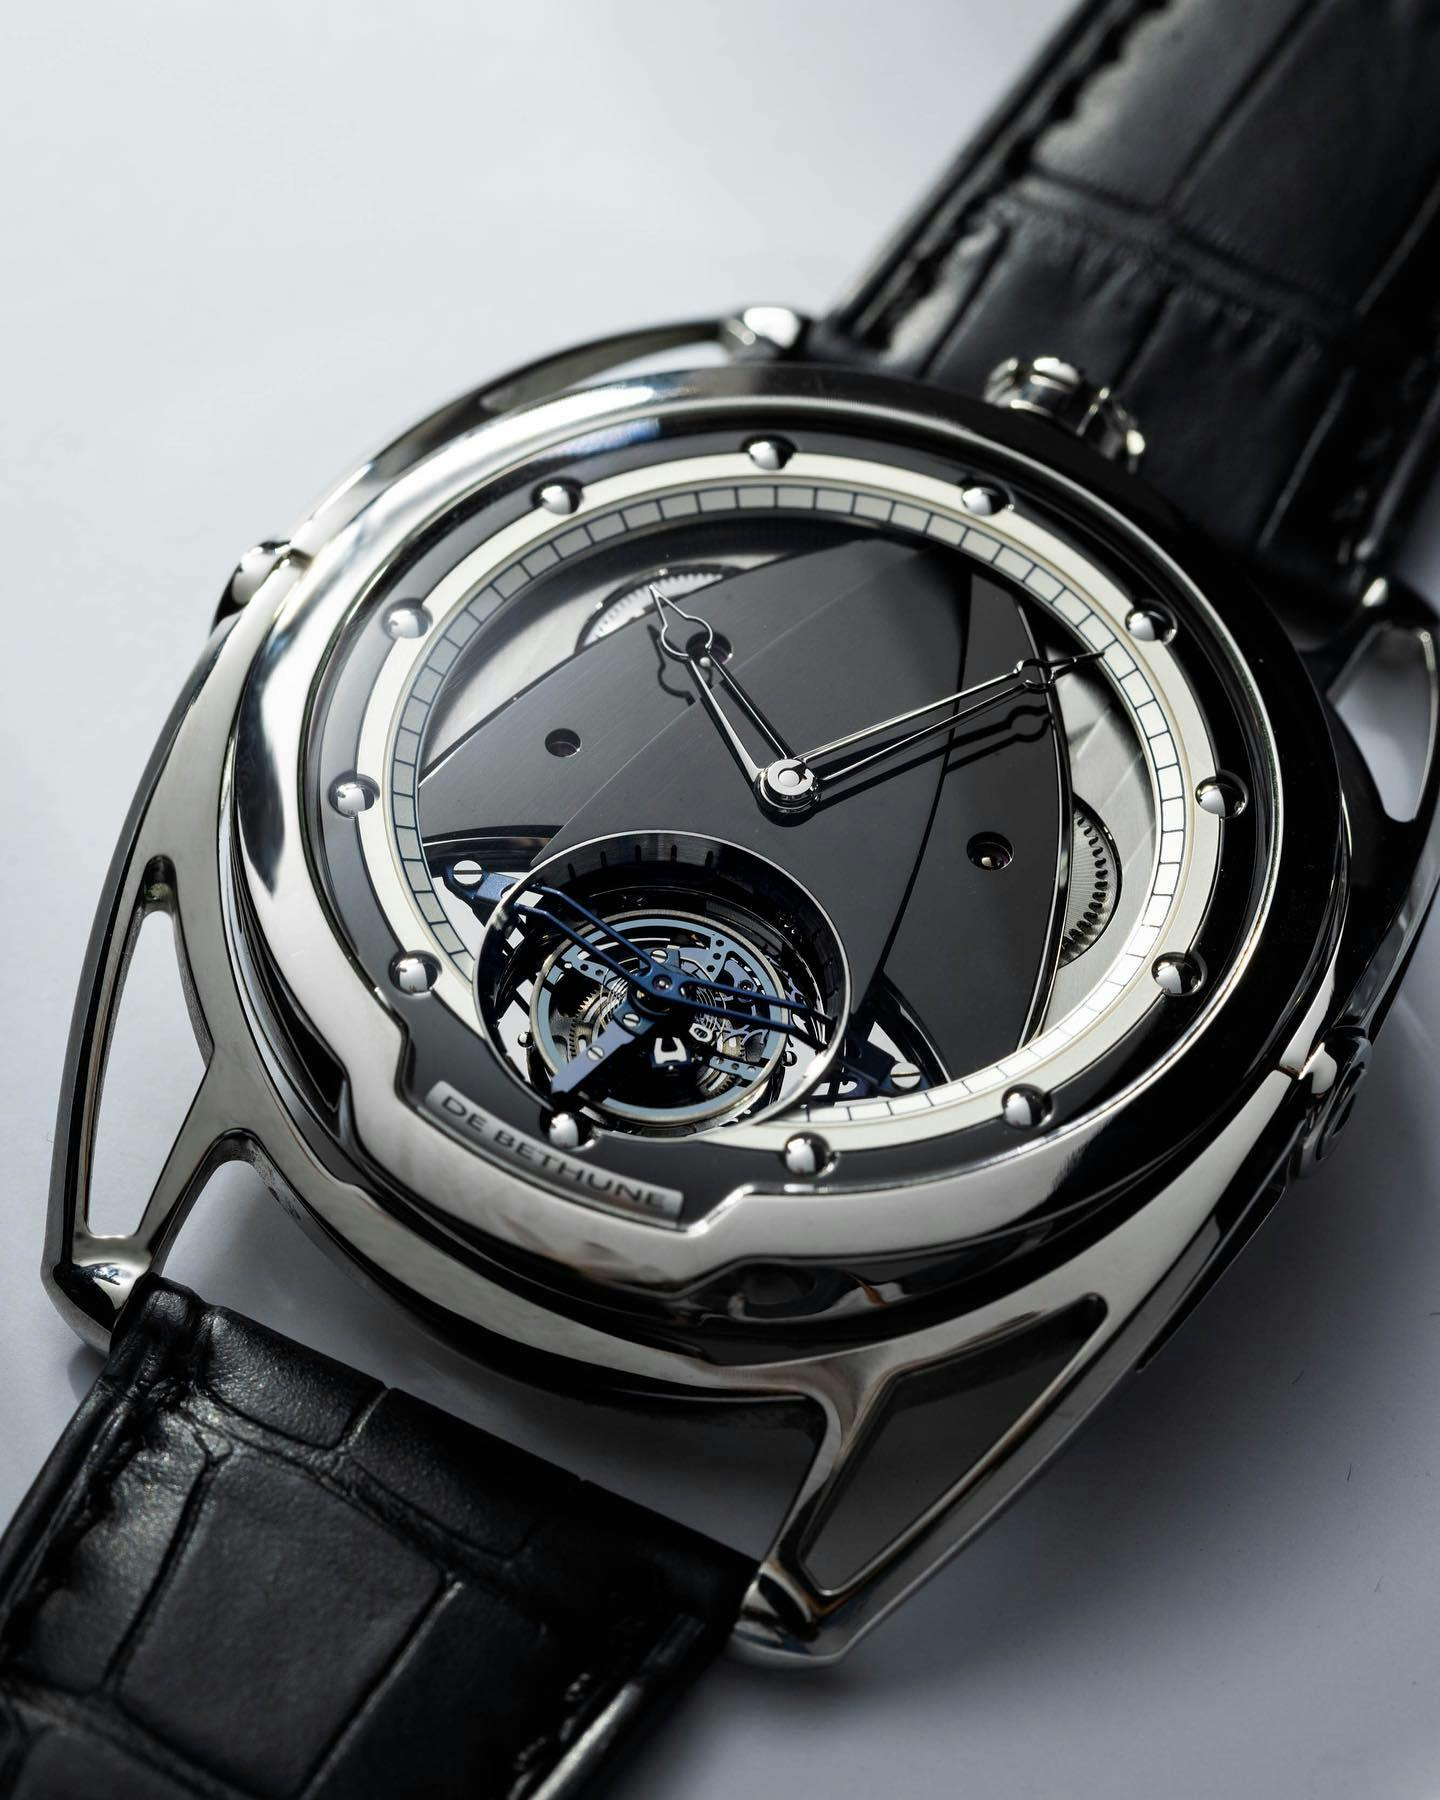 Coming To Our Retrospective Exhibition In Dubai: Three New Masterpieces  From De Bethune | WatchBox